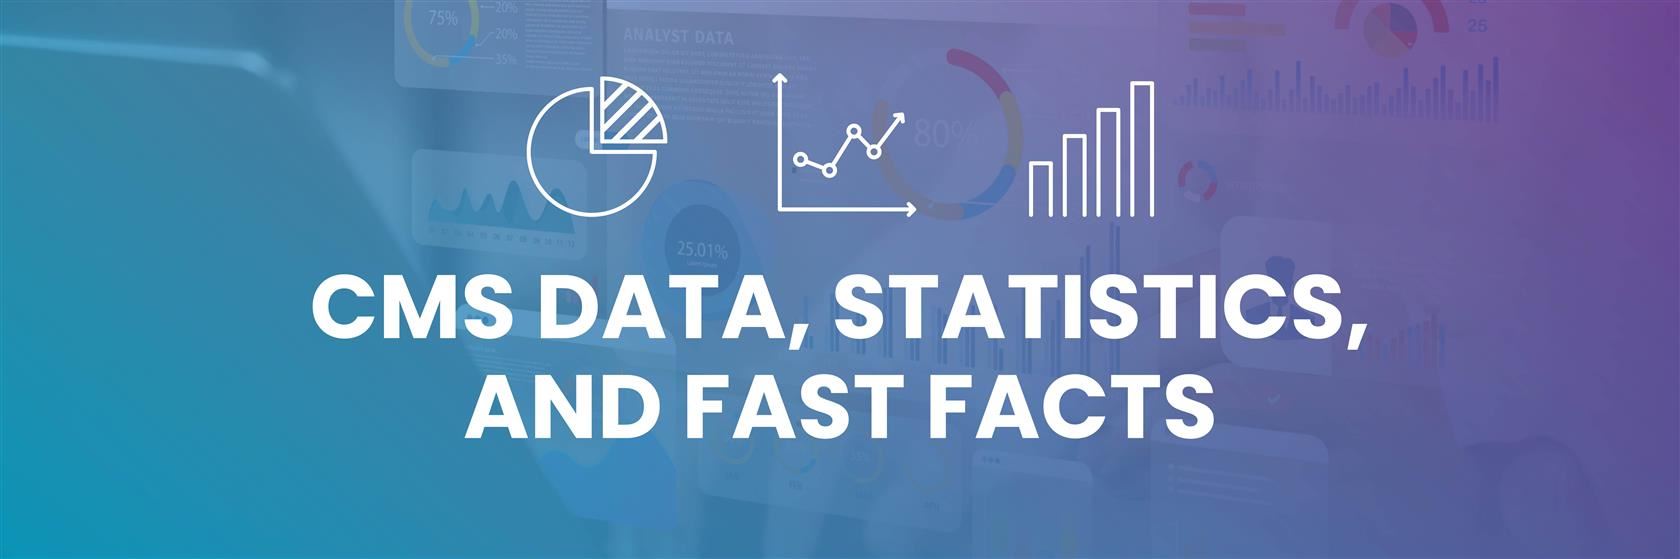 CMS Data, Statistics, and Fast Facts